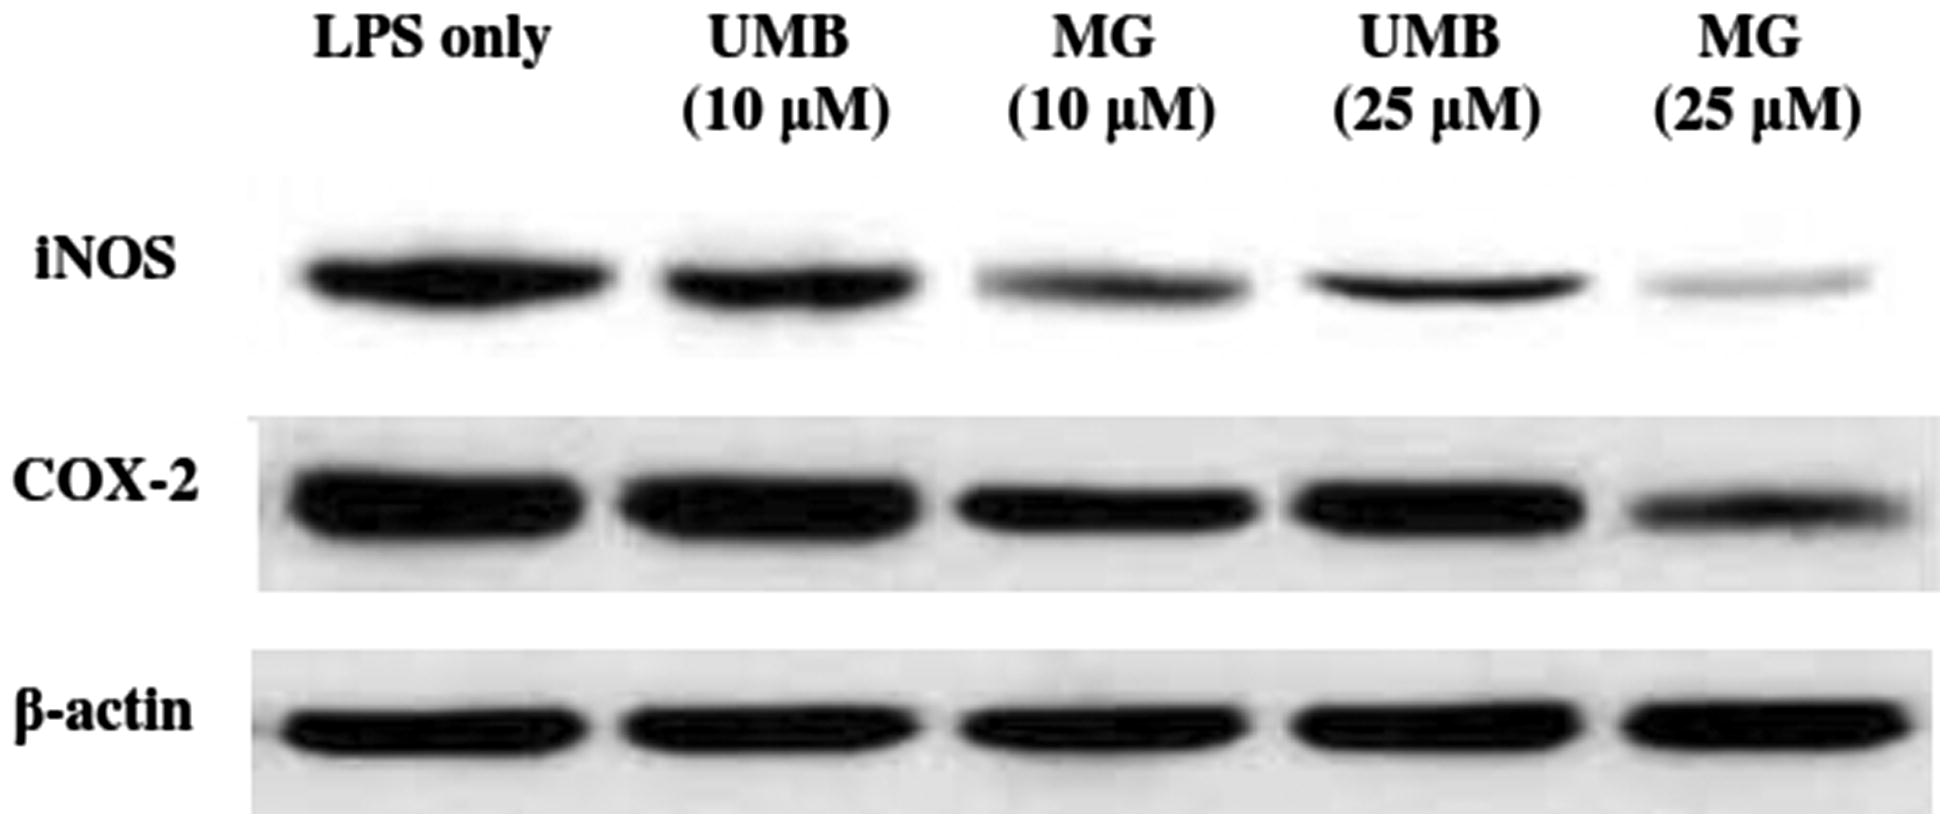 Figure 7. Effect of UMB and MG (10 and 25 μM) on LPS-/IFNγ-induced iNOS, COX-2 and β-actin expression in cultured macrophages. Lysates were prepared from macrophages incubated for 24 h with LPS (10 ng/ml) + IFNγ (100 ng/ml) alone or in combination with test terpenoid coumarins. Cell lysates were then isolated and subjected to Western blot analyses as outlined in Methods. Picture shown is a representative blot from each indicated regimen.